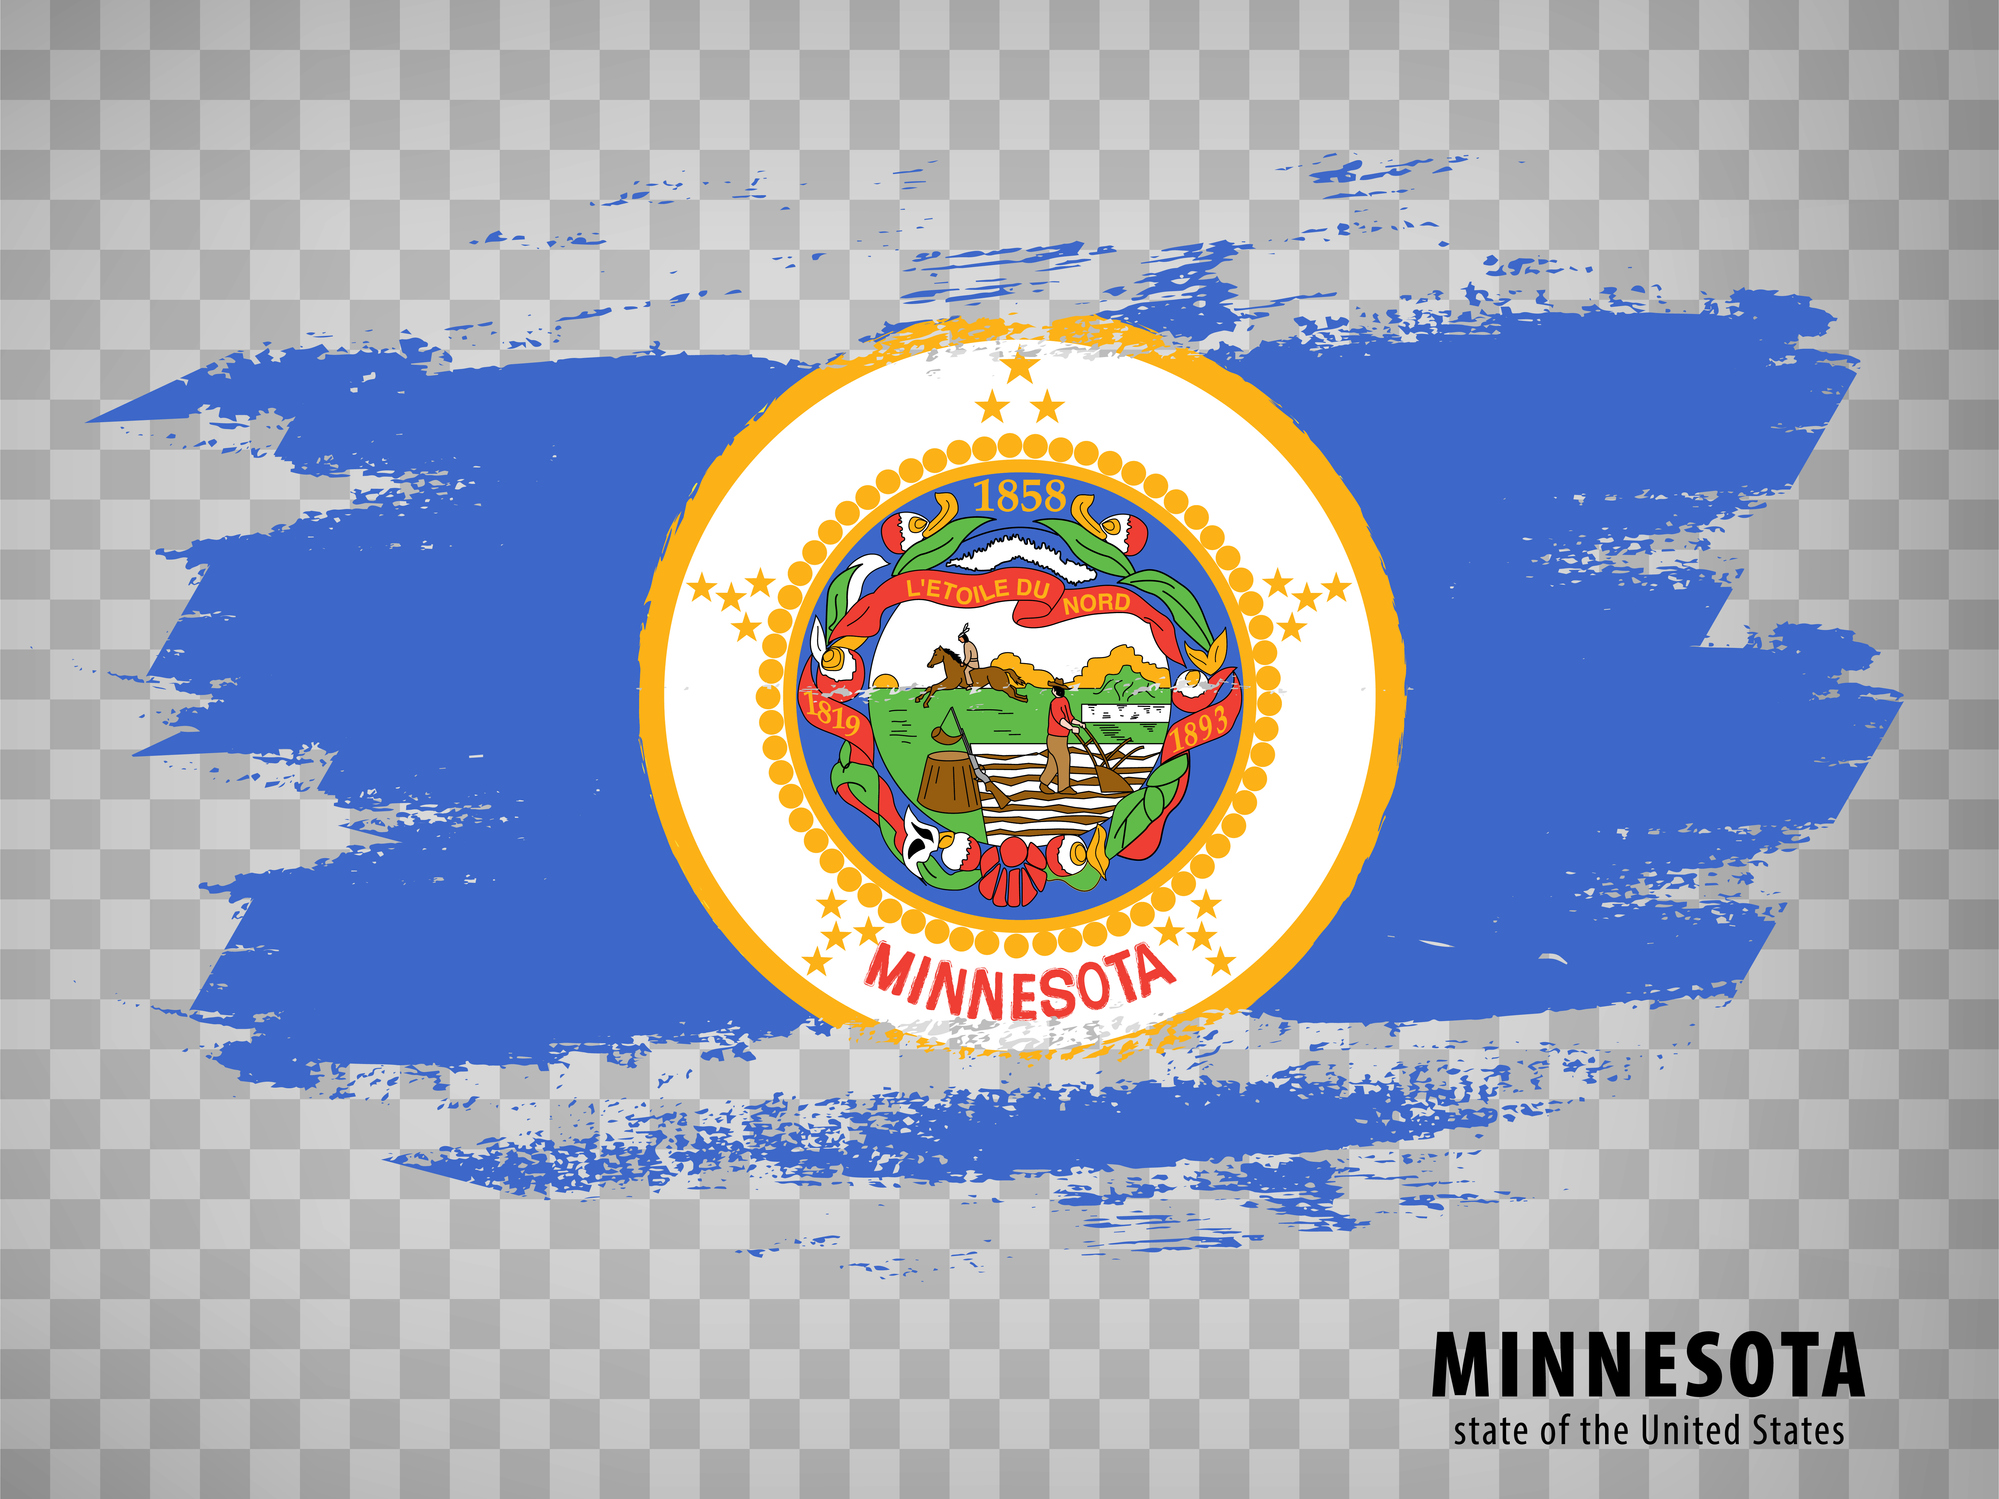 The state flag redesign is underway